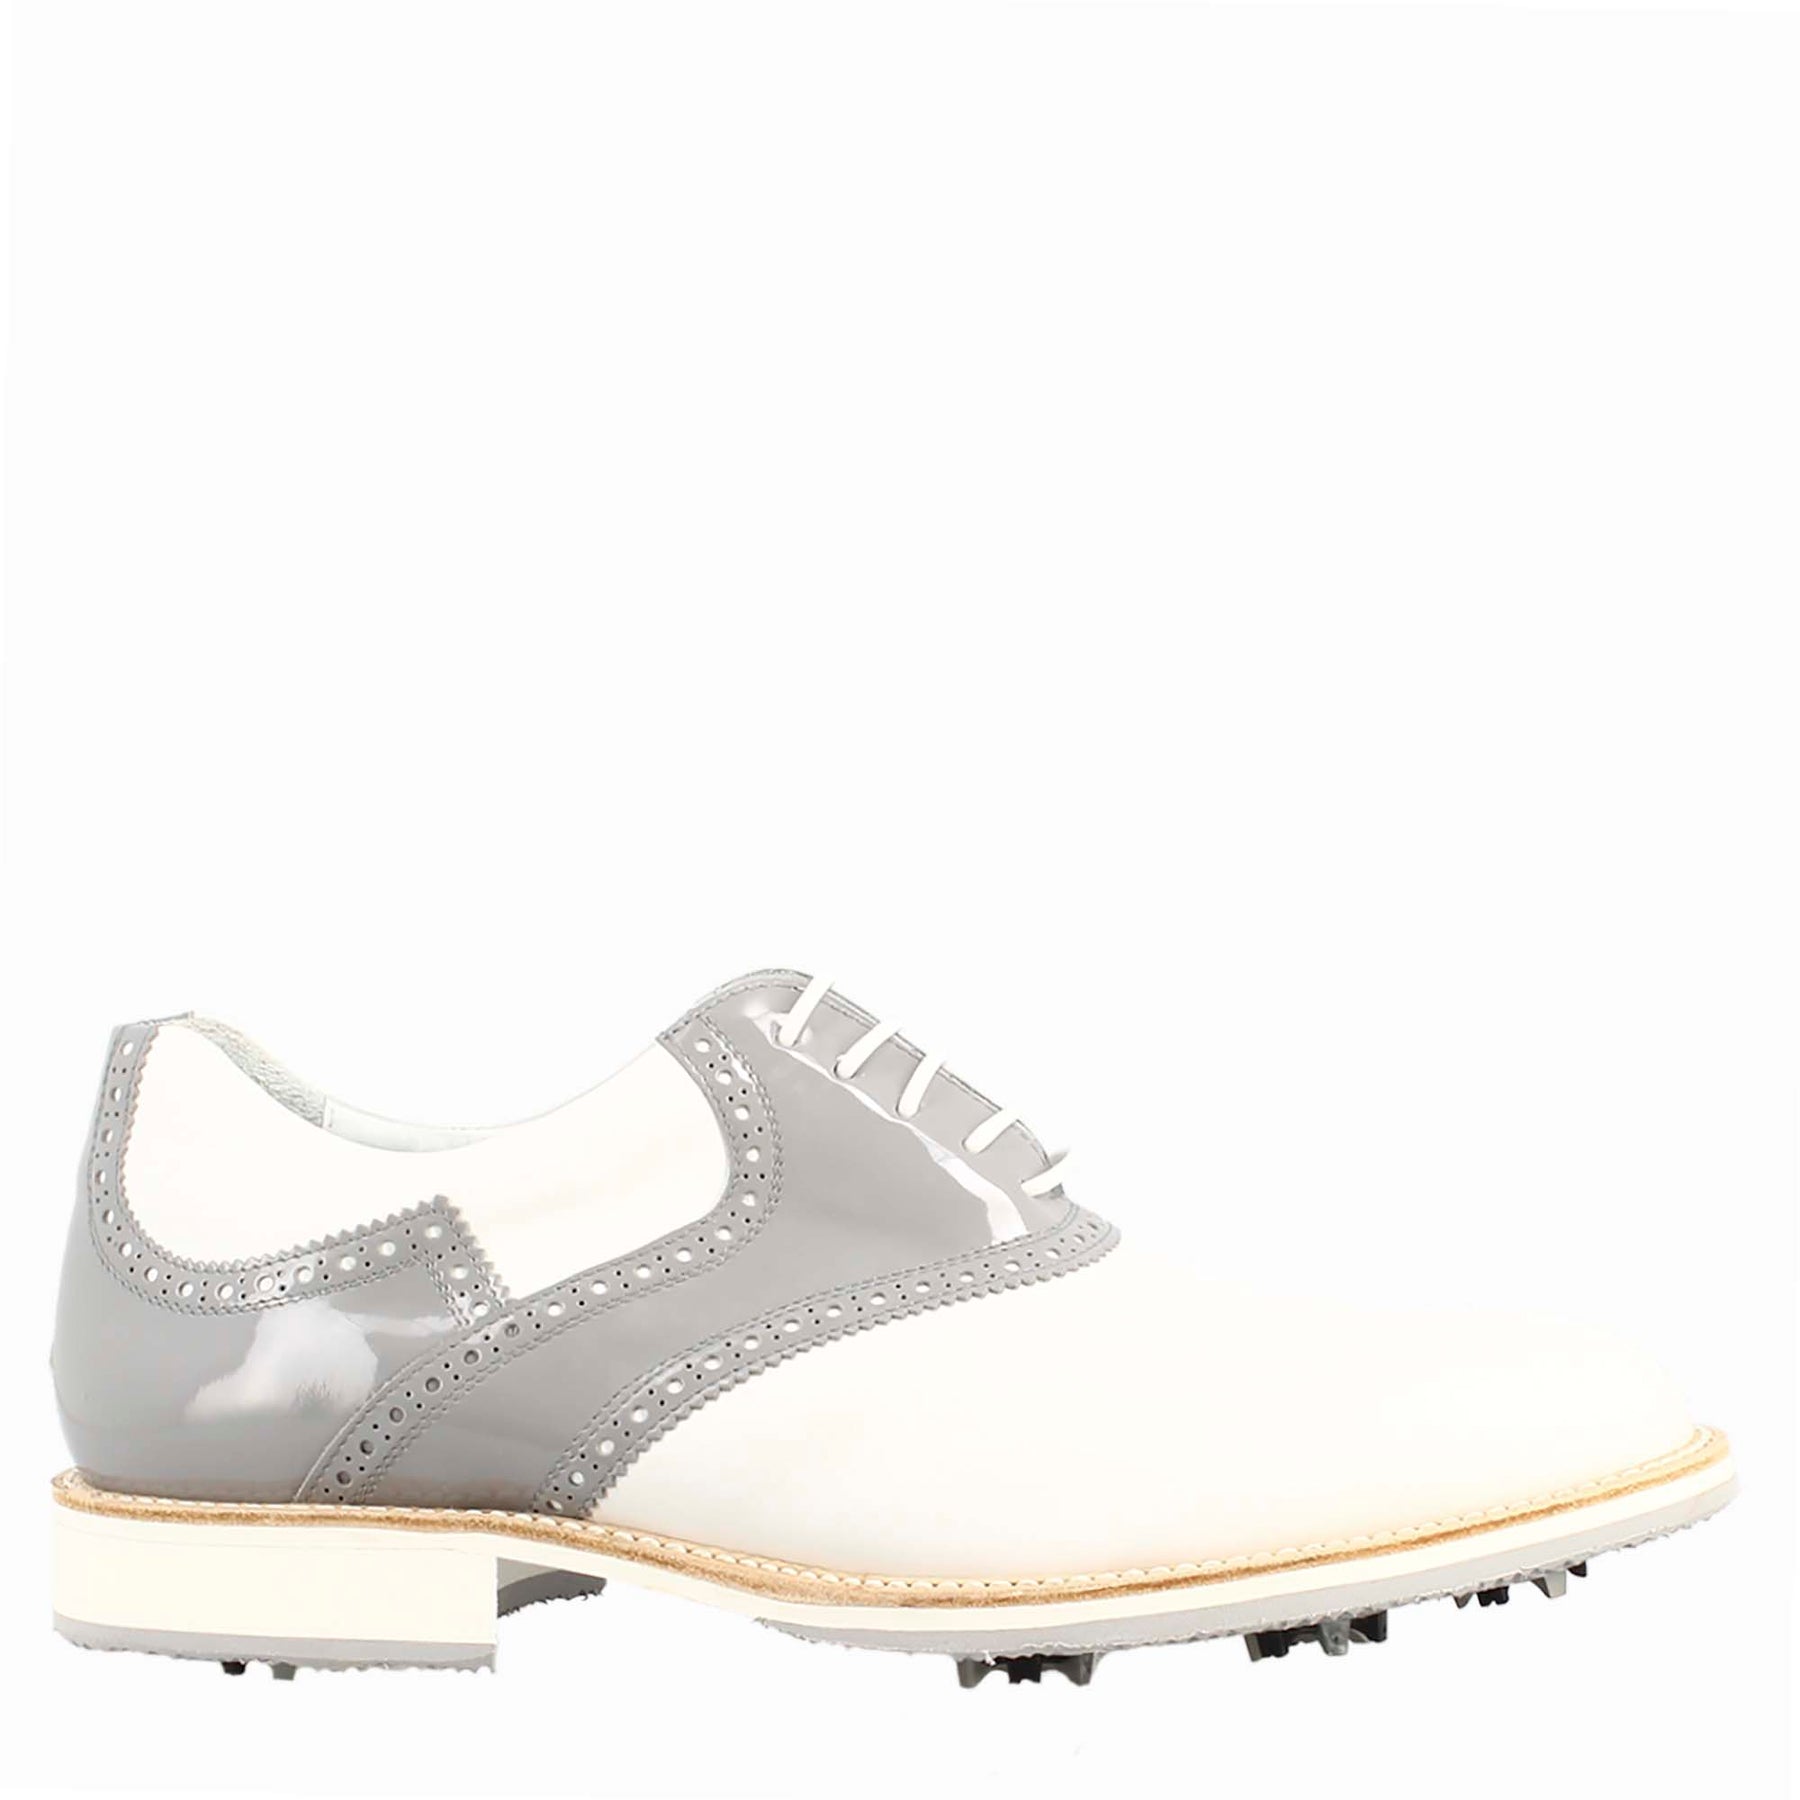 Men's white and grey leather handcrafted brogue details